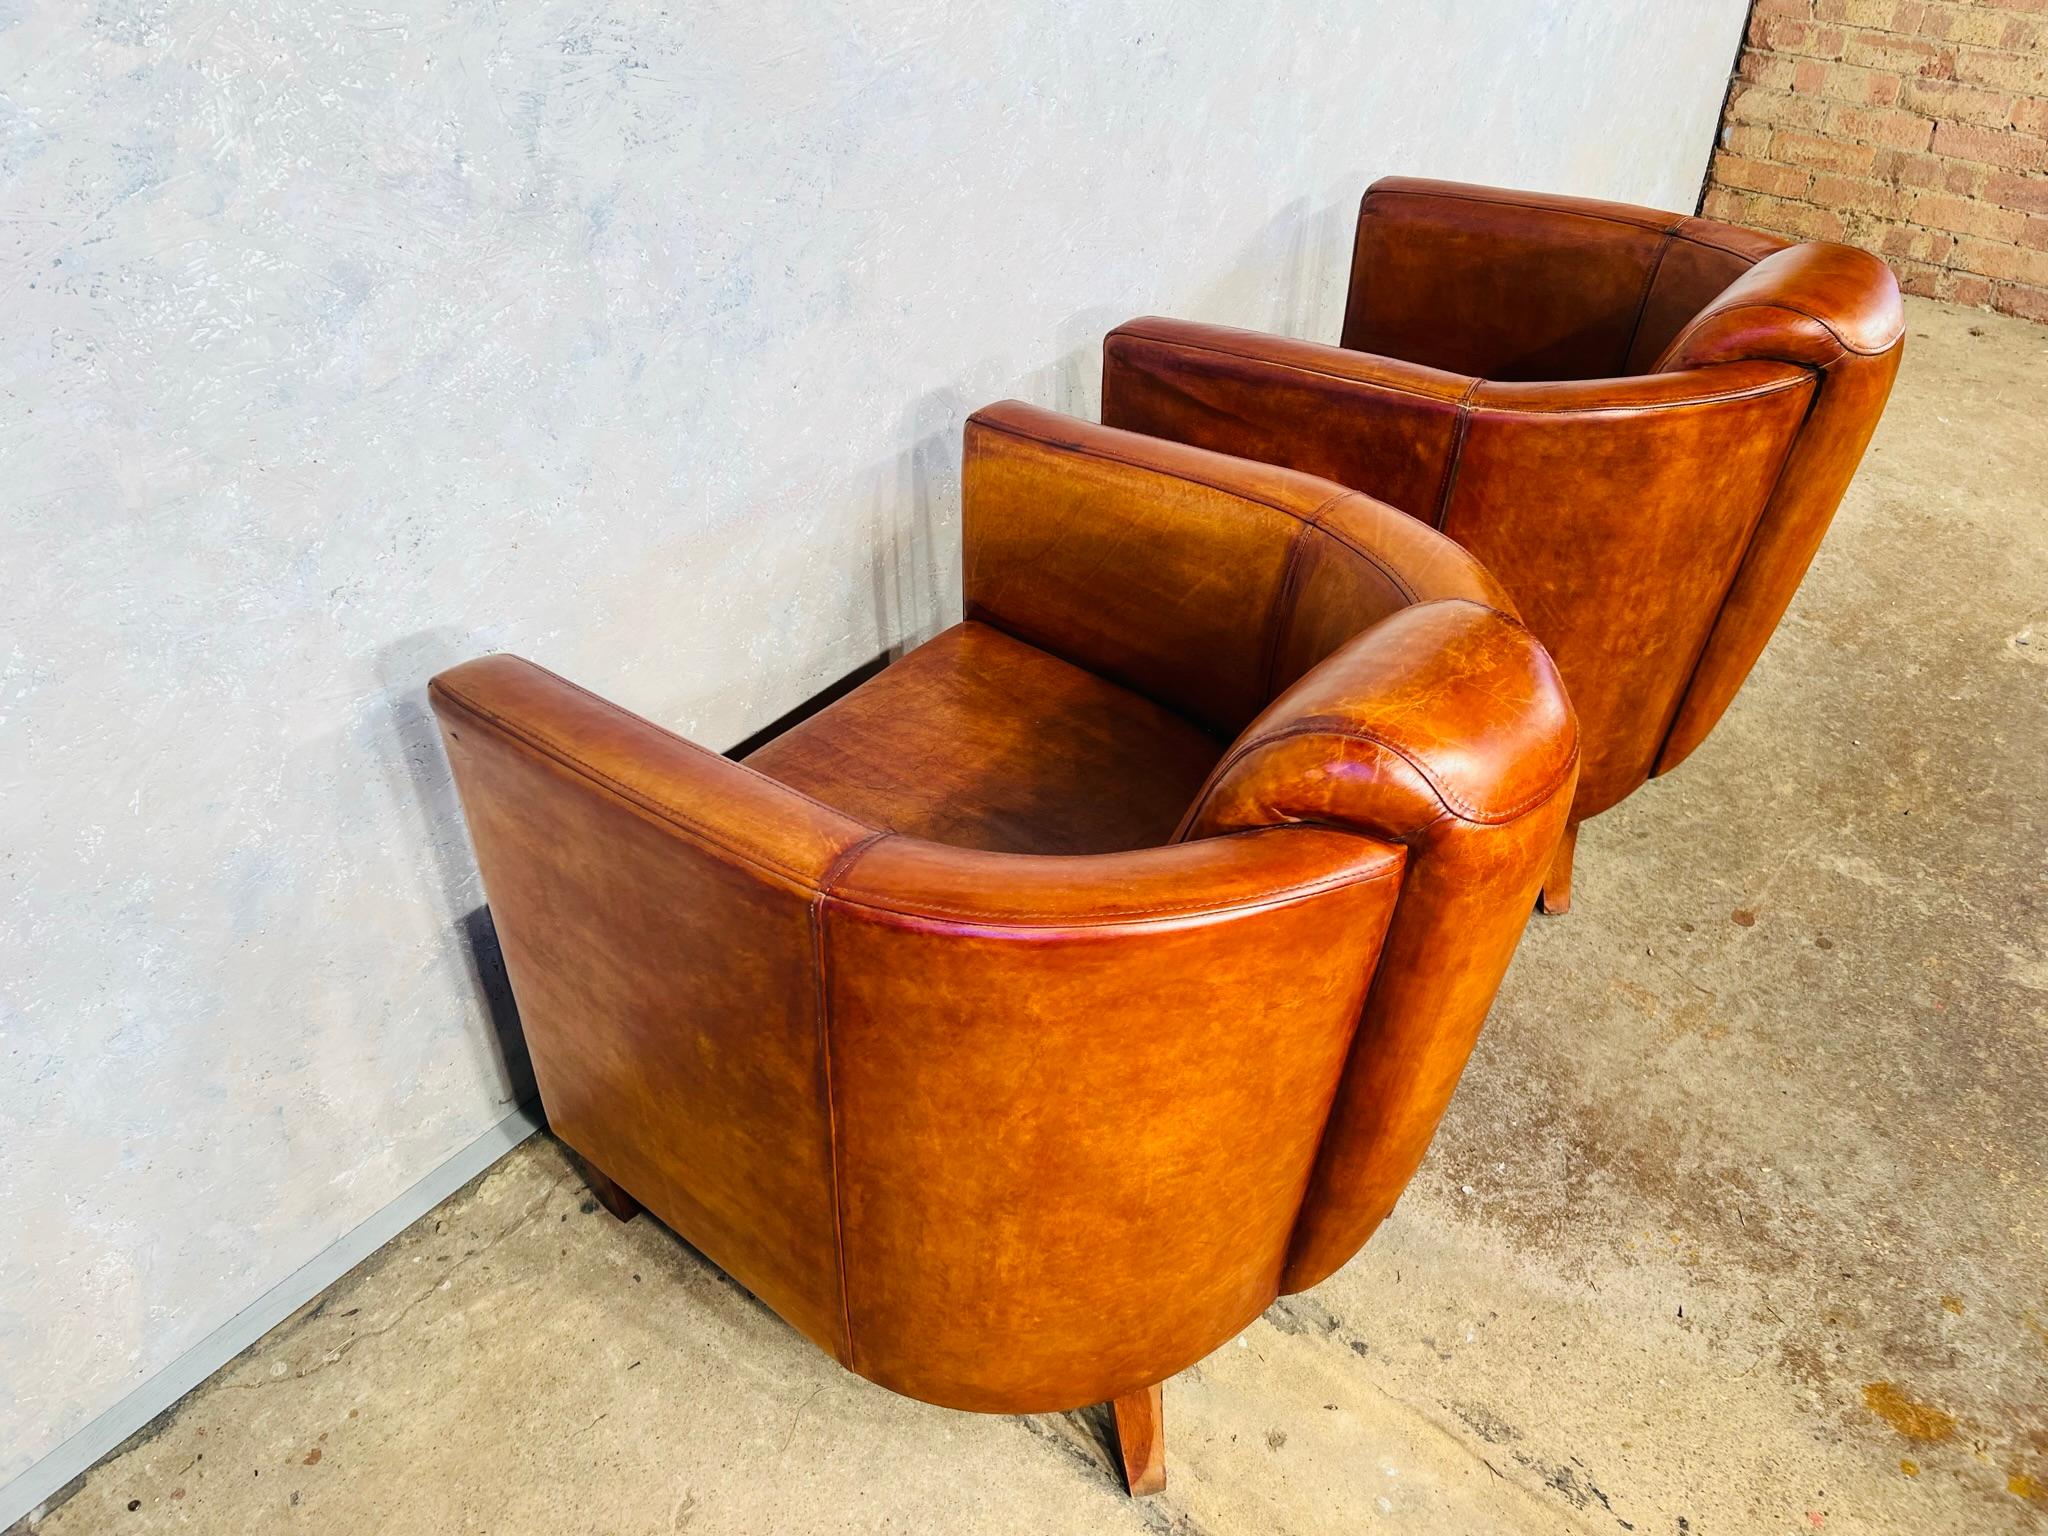 Stunning Pair of Art Deco Aviator Leather Chairs, Hand Dyed Tan #630 8